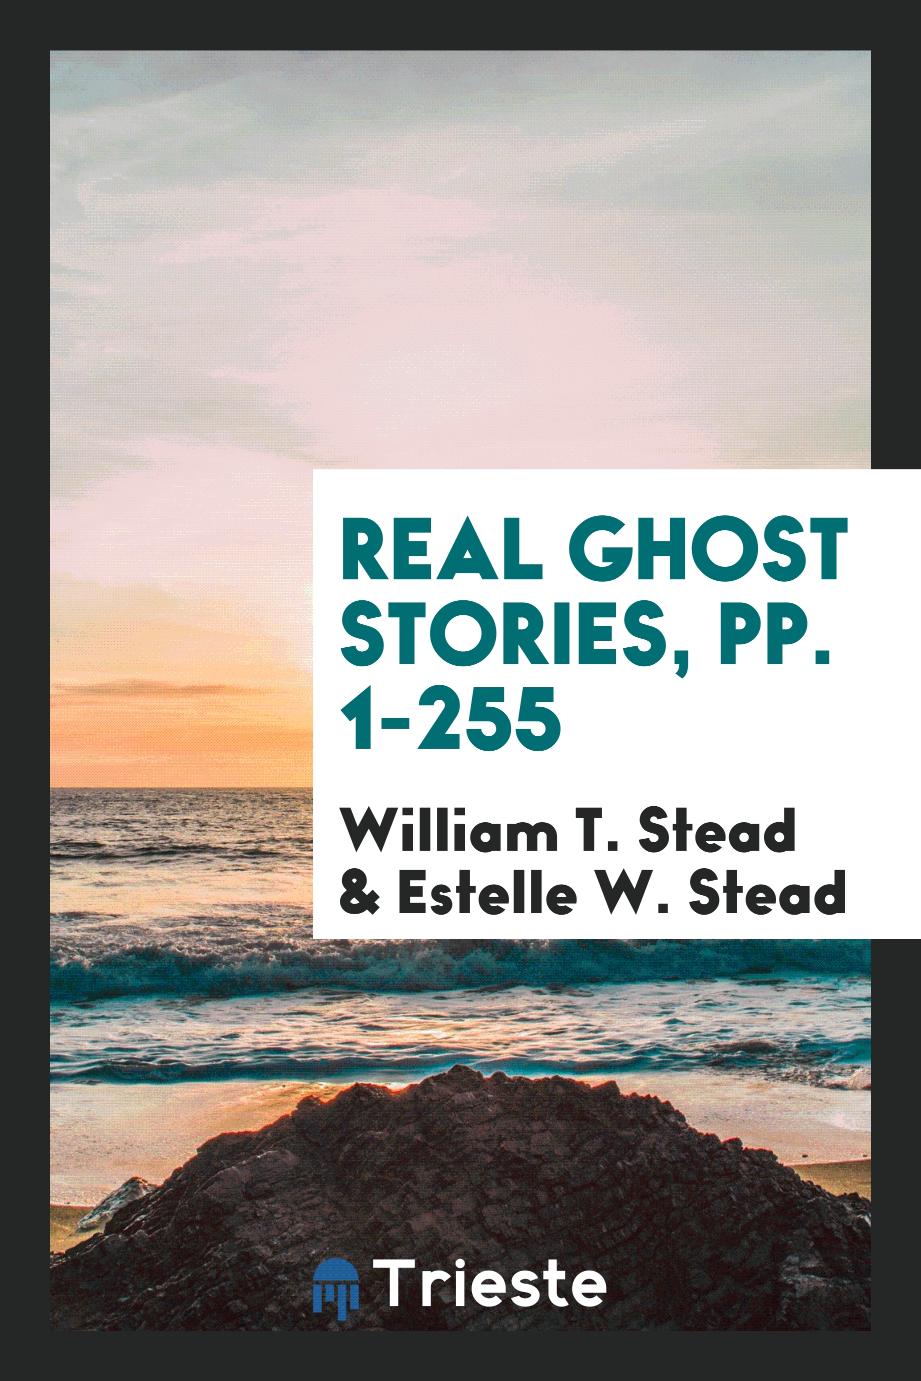 Real Ghost Stories, pp. 1-255